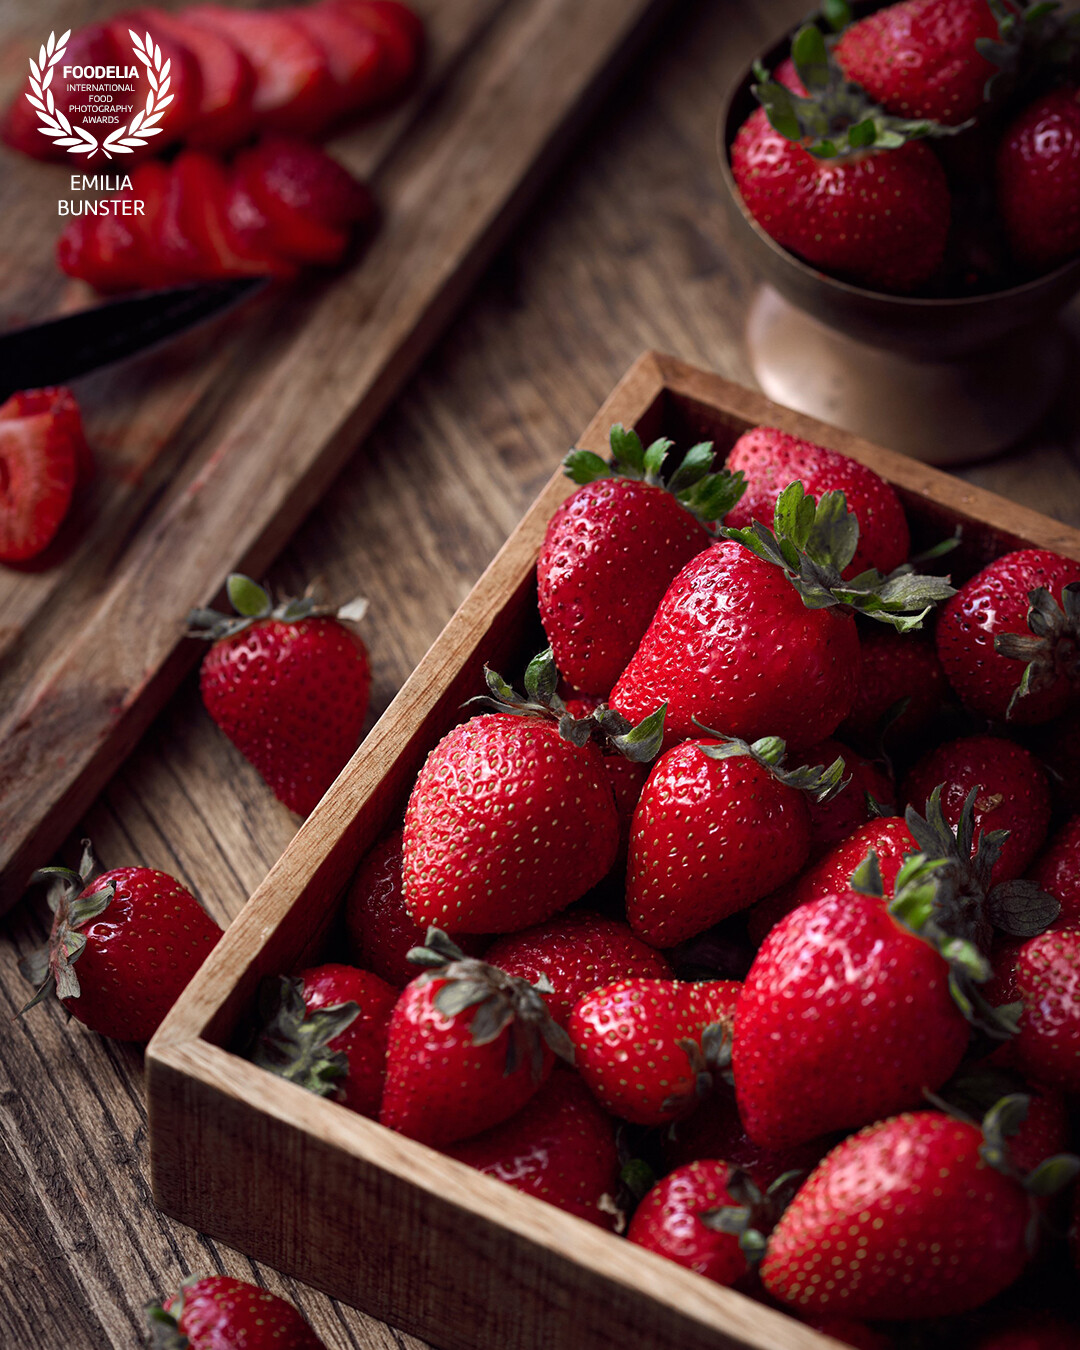 (Eva Kosmas Flores challenge) <br />
Inspired by Eva’s use of Red in her work<br />
<br />
I wanted to use the context of the strawberries being cut and prepared for something, but in my case I concentrated on the stacked strawberries which I think look great in detail.